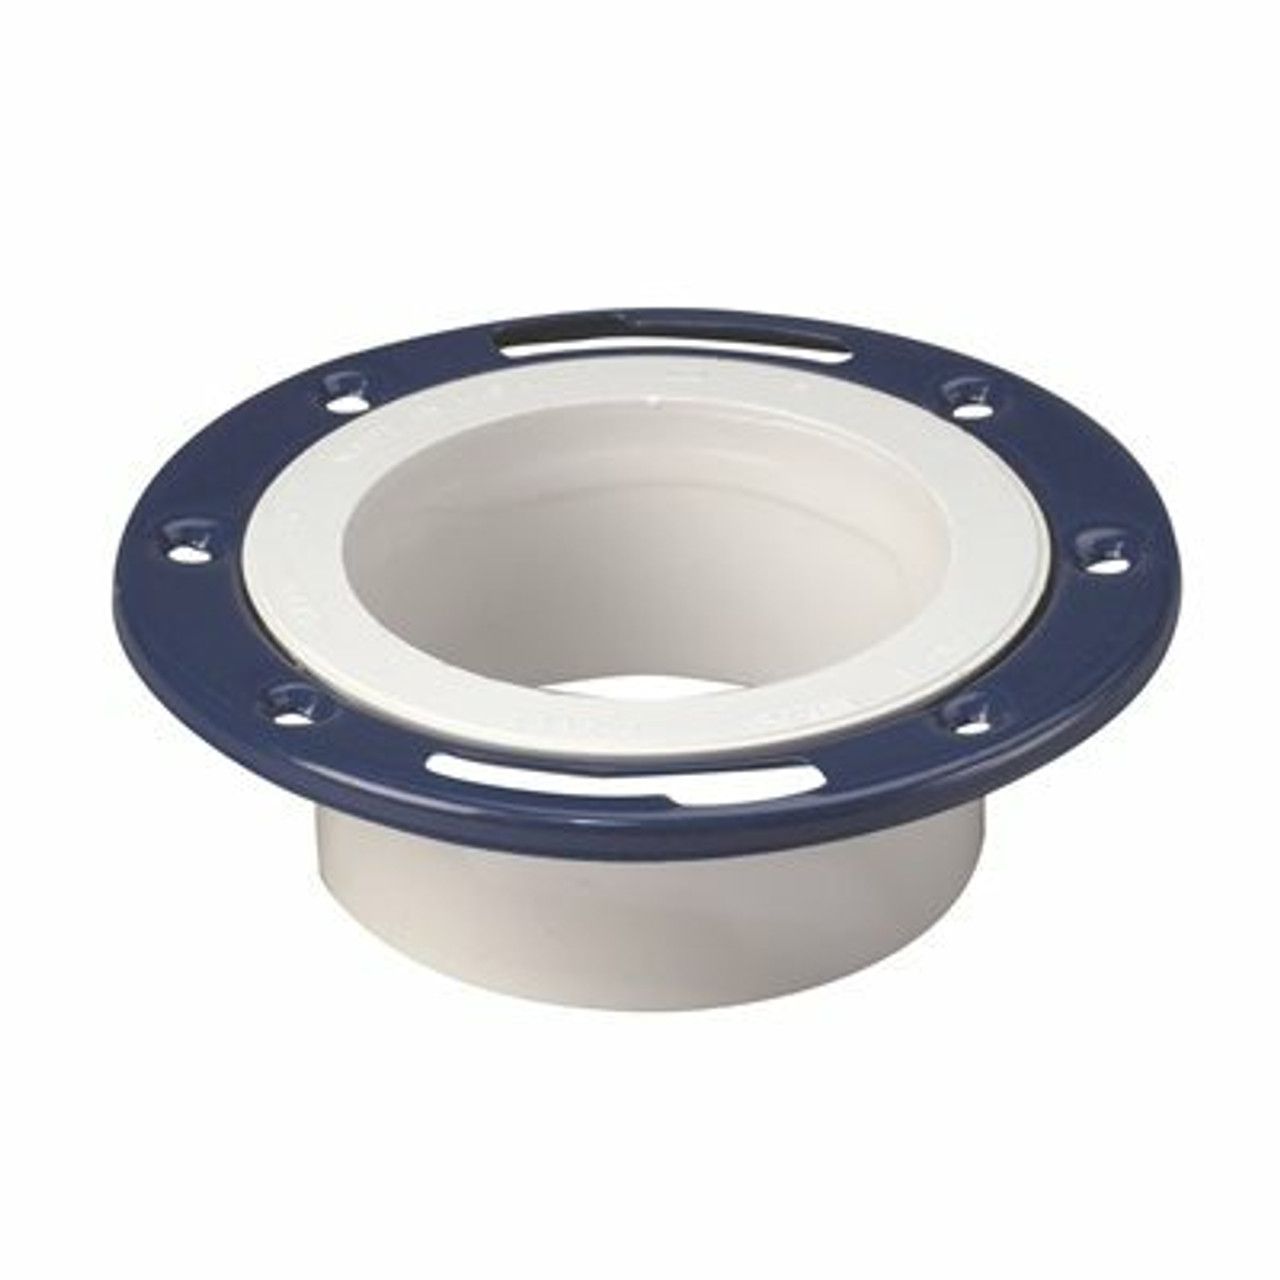 Water-Tite Flush-Tite Plastic Closet Flange For 3 In. Or 4 In. Pvc Pipe With Metal Ring